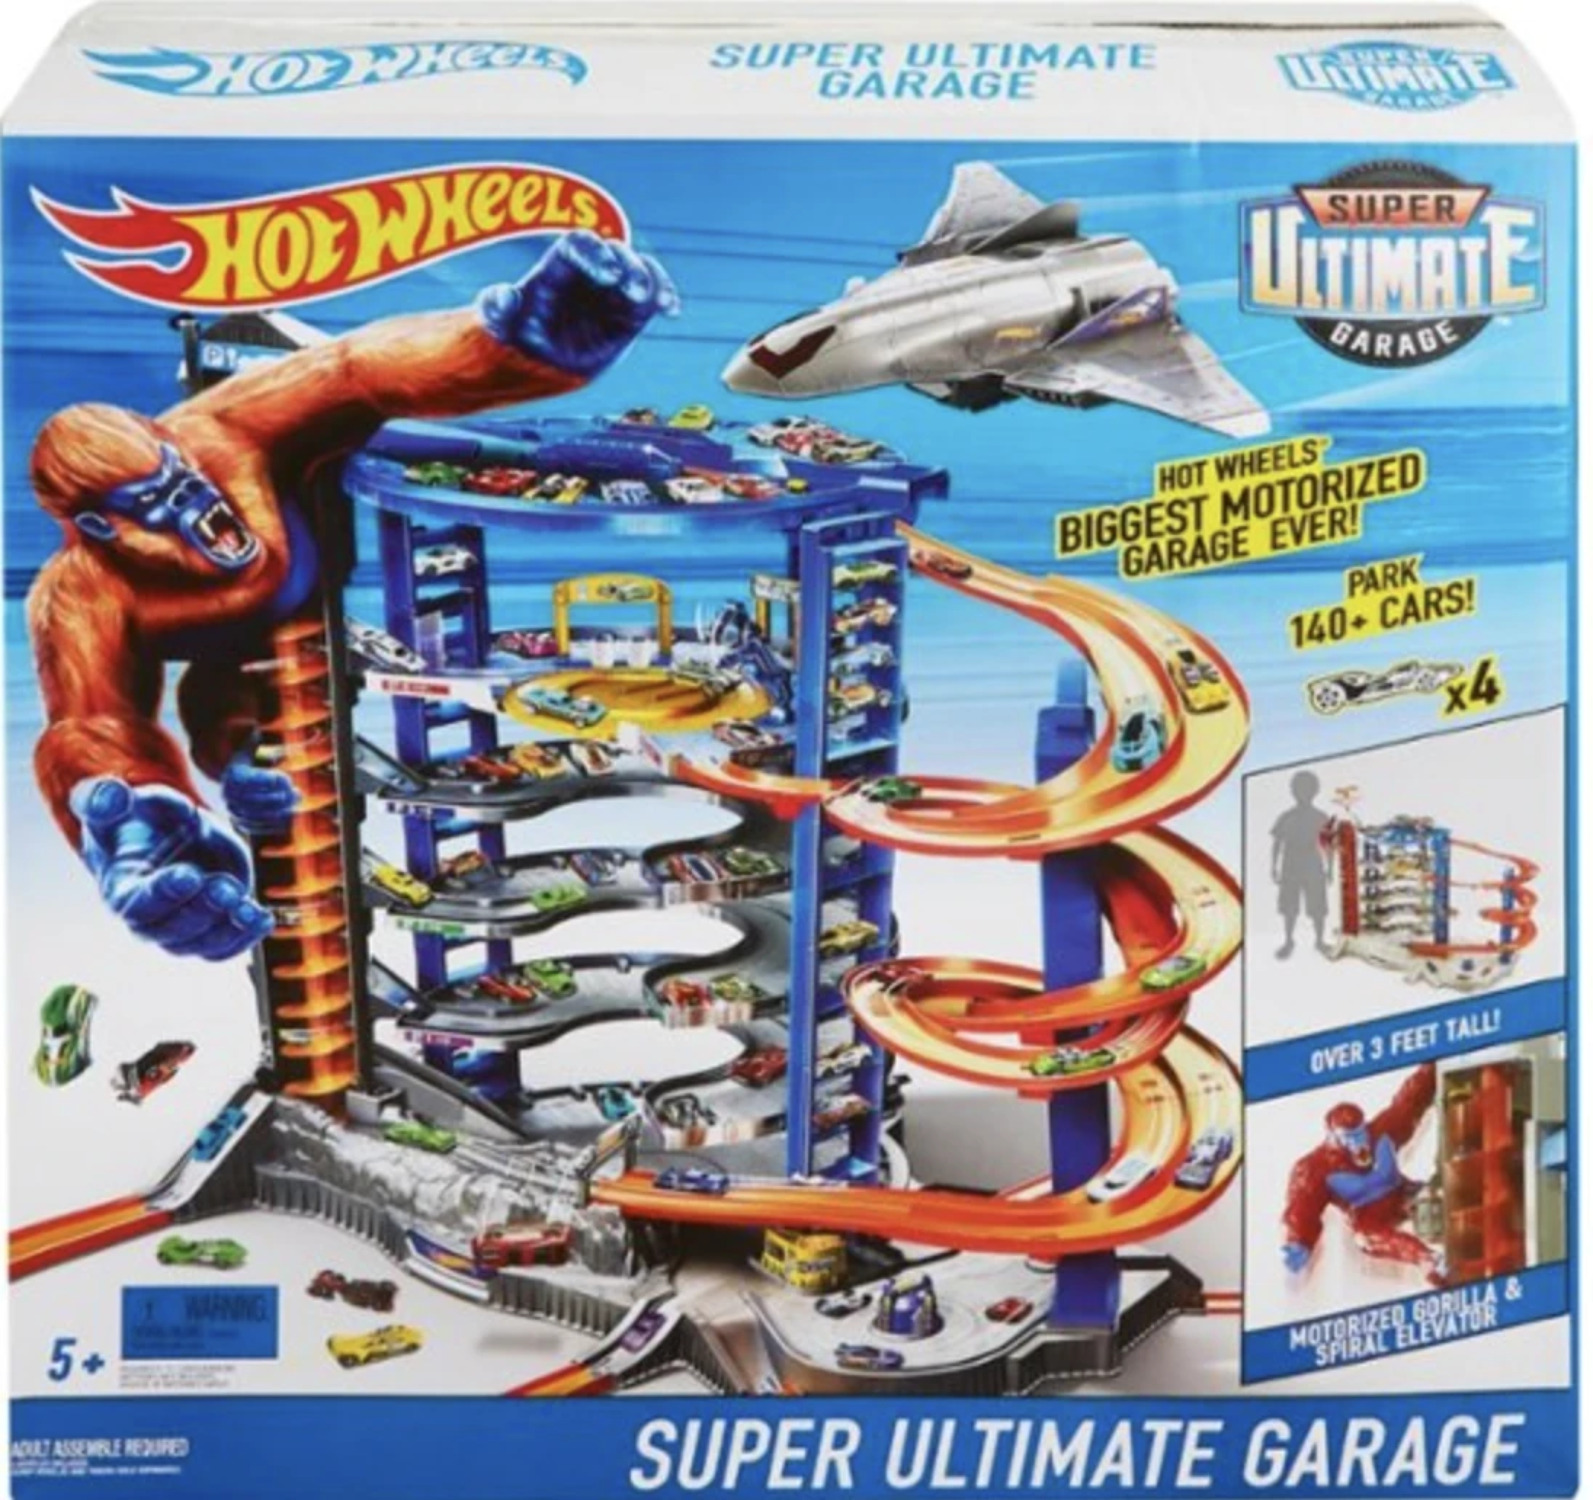 Hot Wheels Track Set with 4 1:64 Scale Toy Cars, Super Ultimate Garage, Over 3-Feet Tall - image 1 of 8